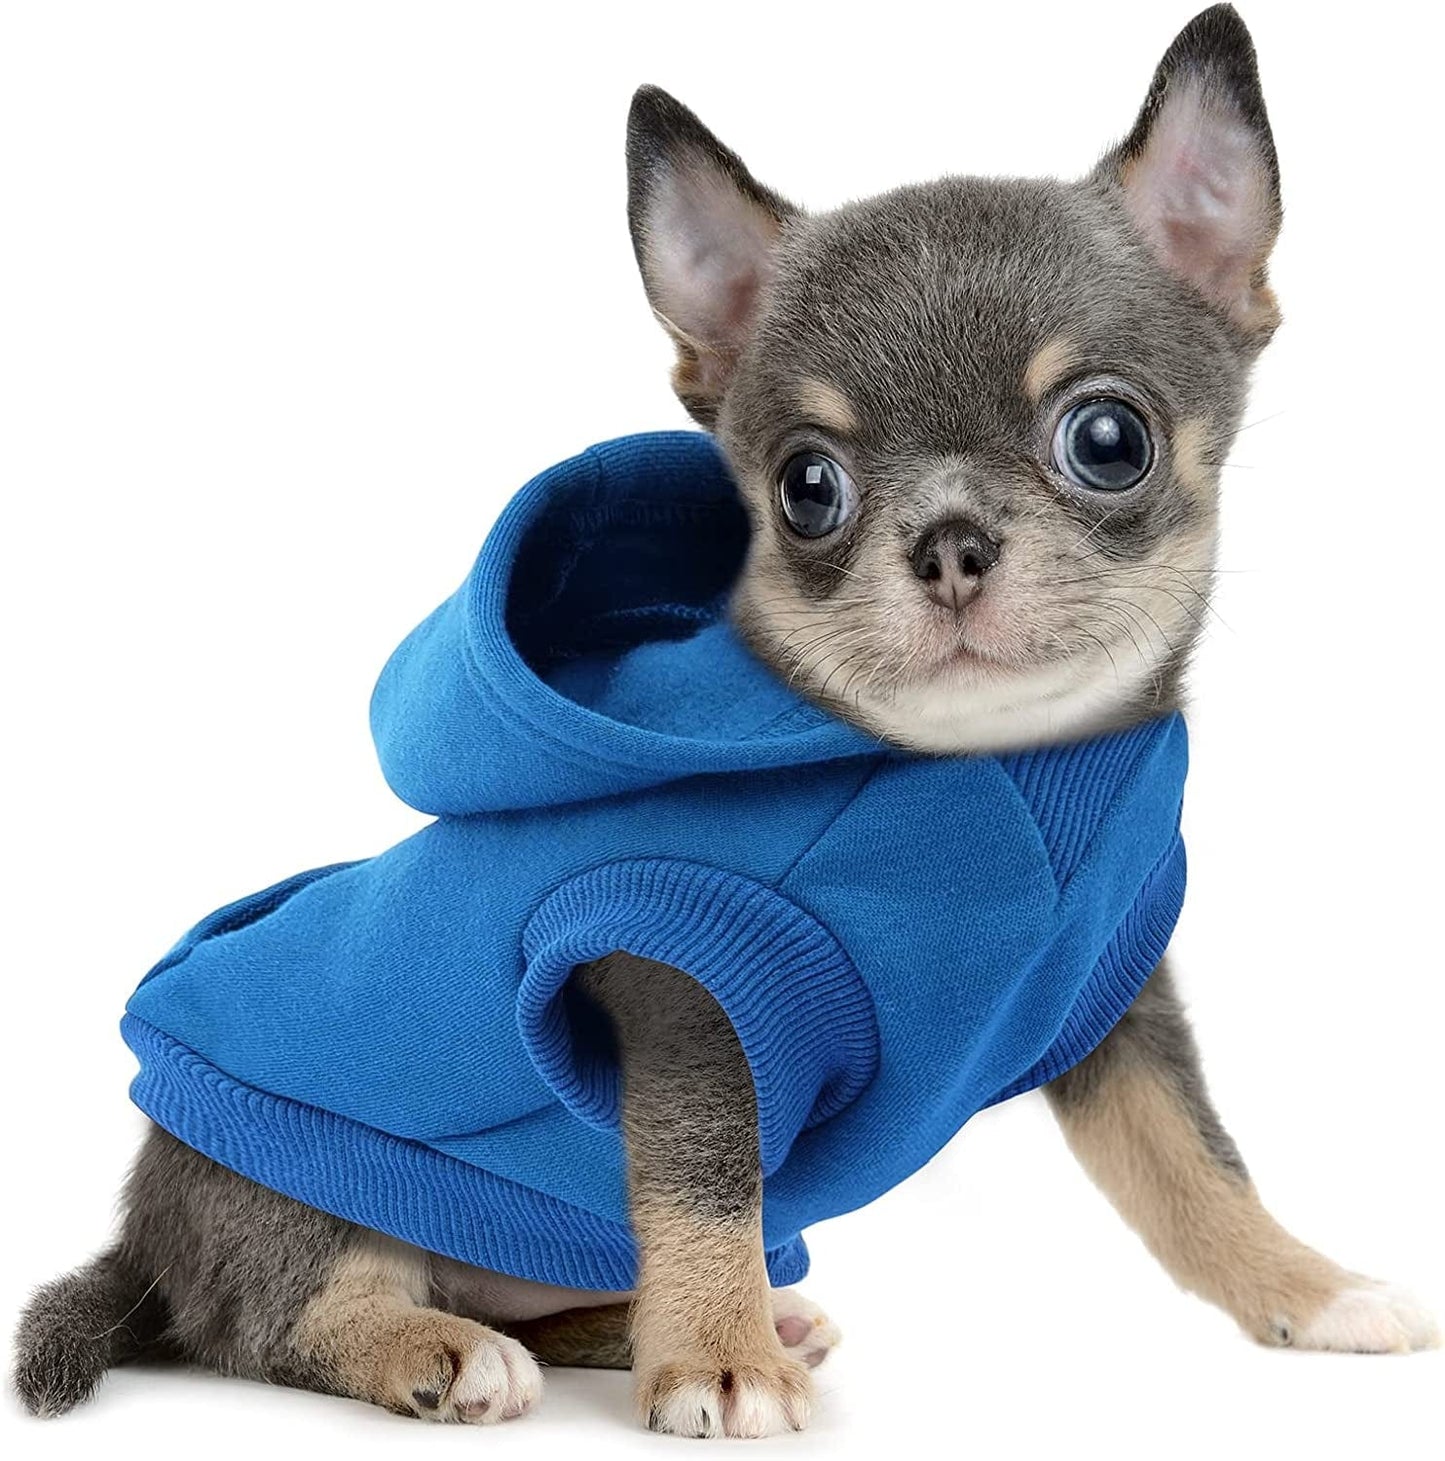 𝐍𝐄𝐖 𝐀𝐑𝐑𝐈𝐕𝐀𝐋 Frienperro Dog Clothes for Small Dogs Girl Boy, 100% Cotton Buffalo Plaid Small Dog Hoodie, Chihuahua Clothes Pet Cat Winter Warm Sweatshirt Sweater, Teacup Yorkie Puppy Coat Animals & Pet Supplies > Pet Supplies > Dog Supplies > Dog Apparel Frienperro Blue XXX-Small 